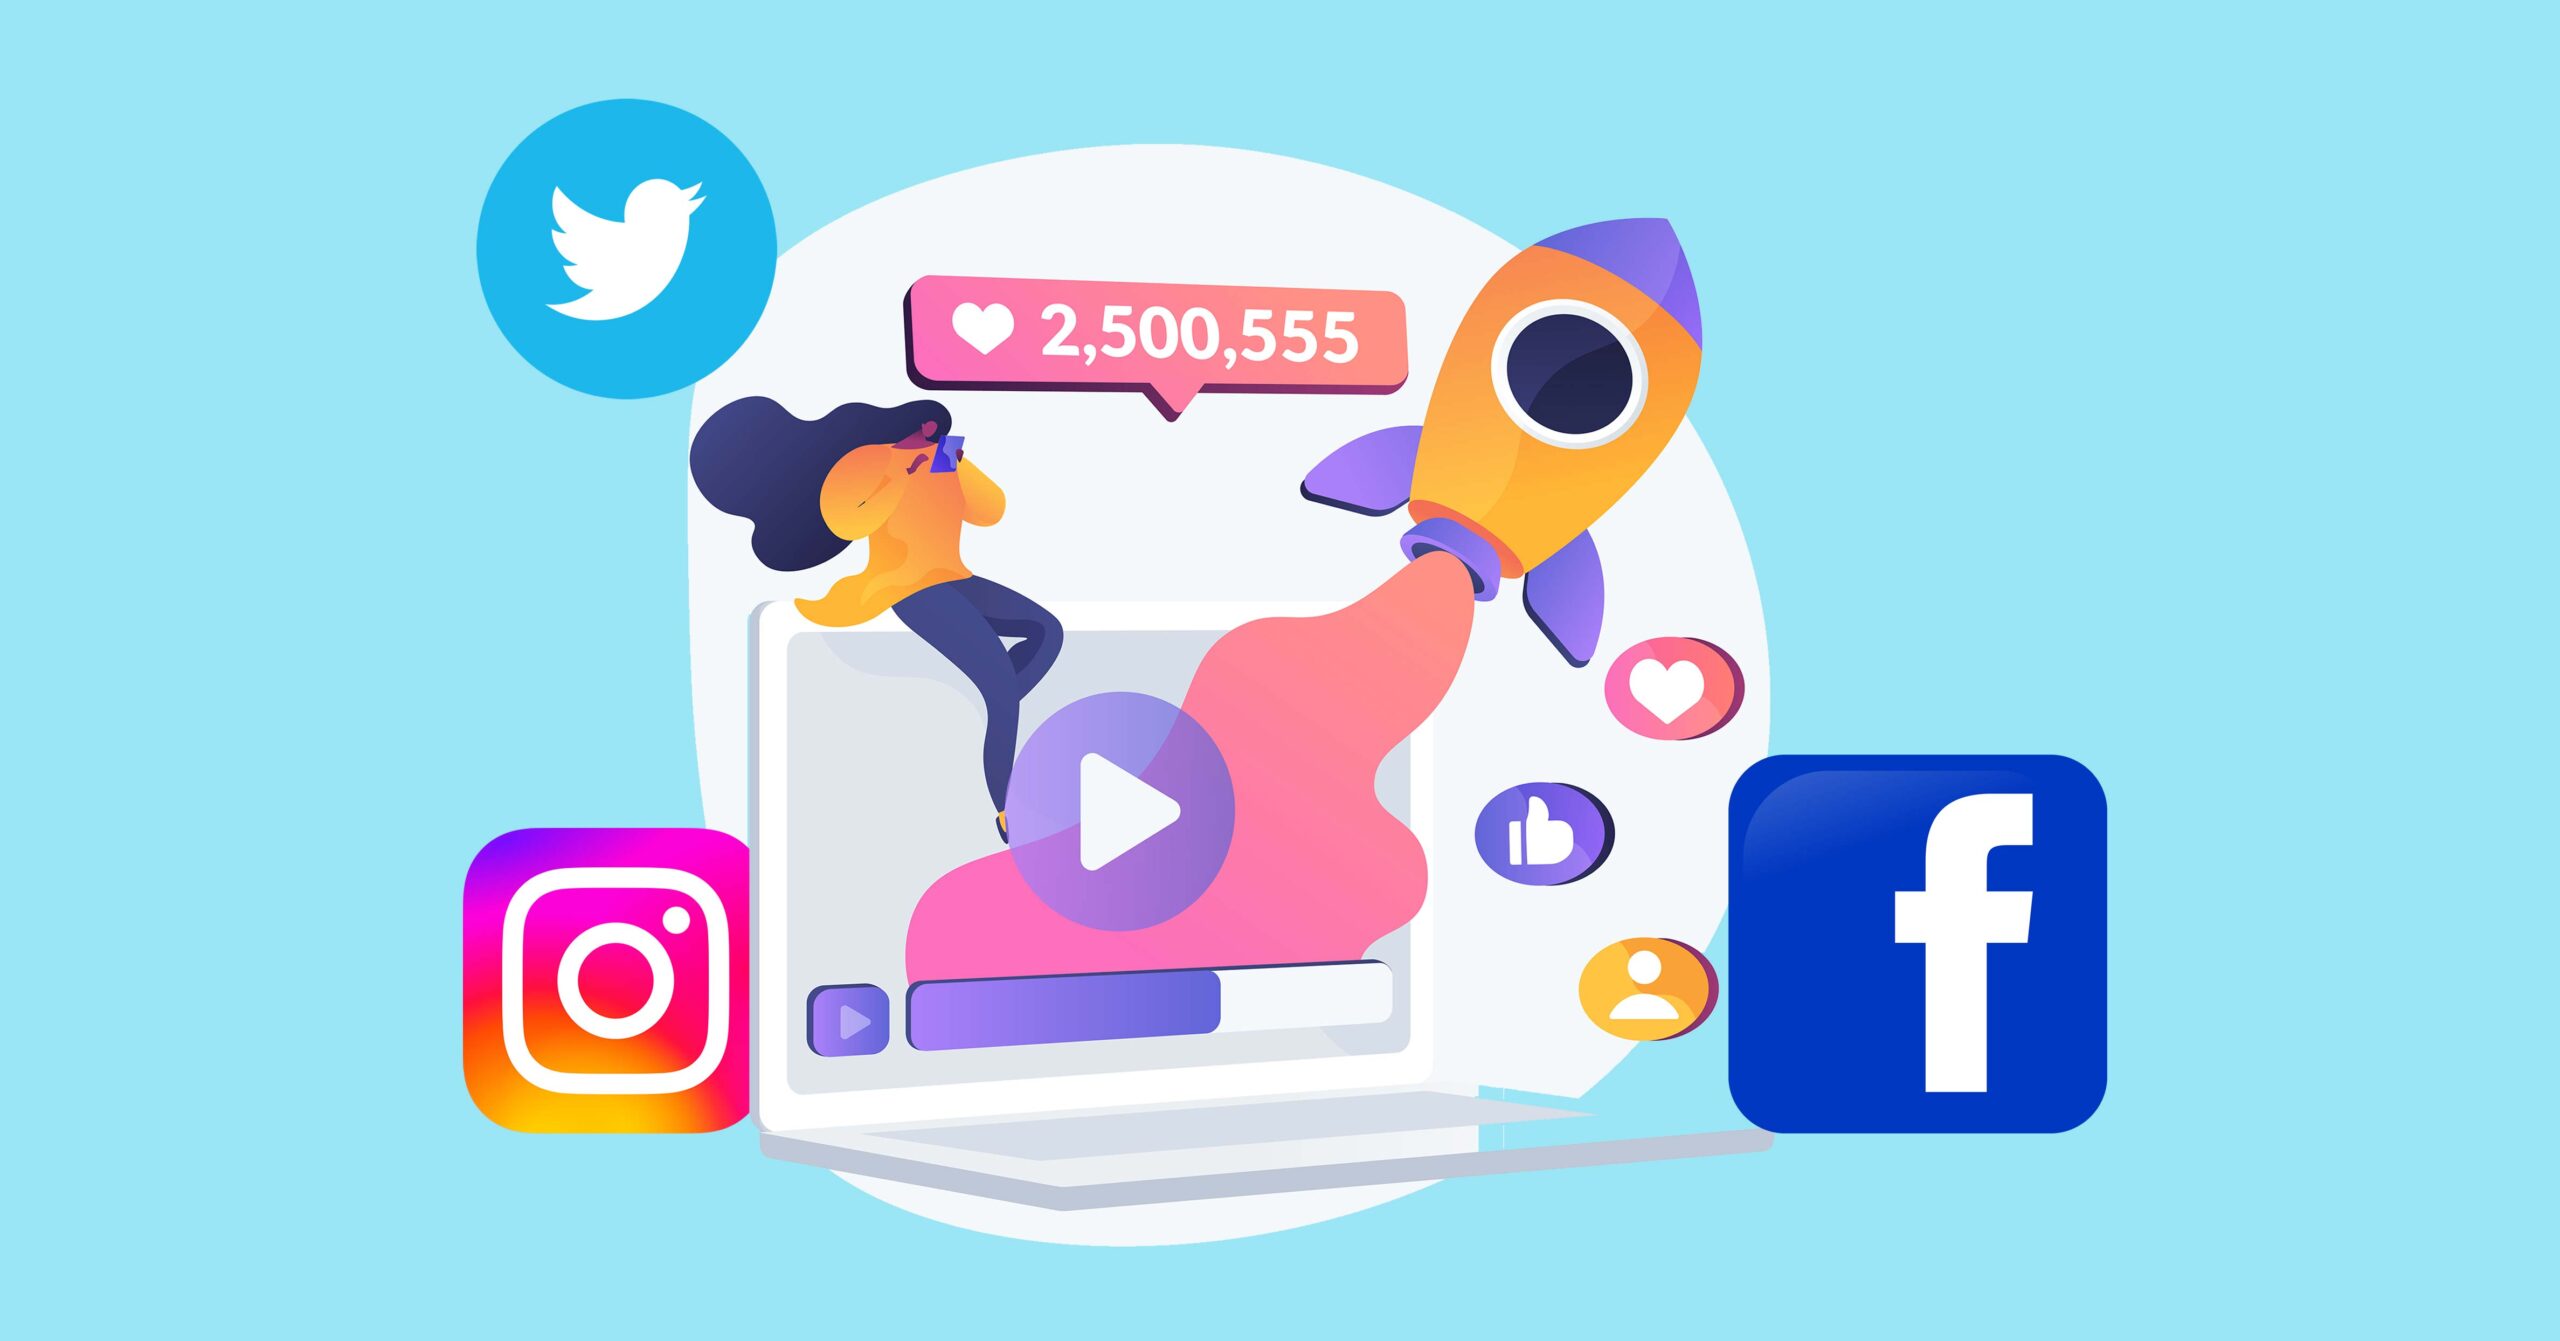 Use Social Media To Grow Your Channel